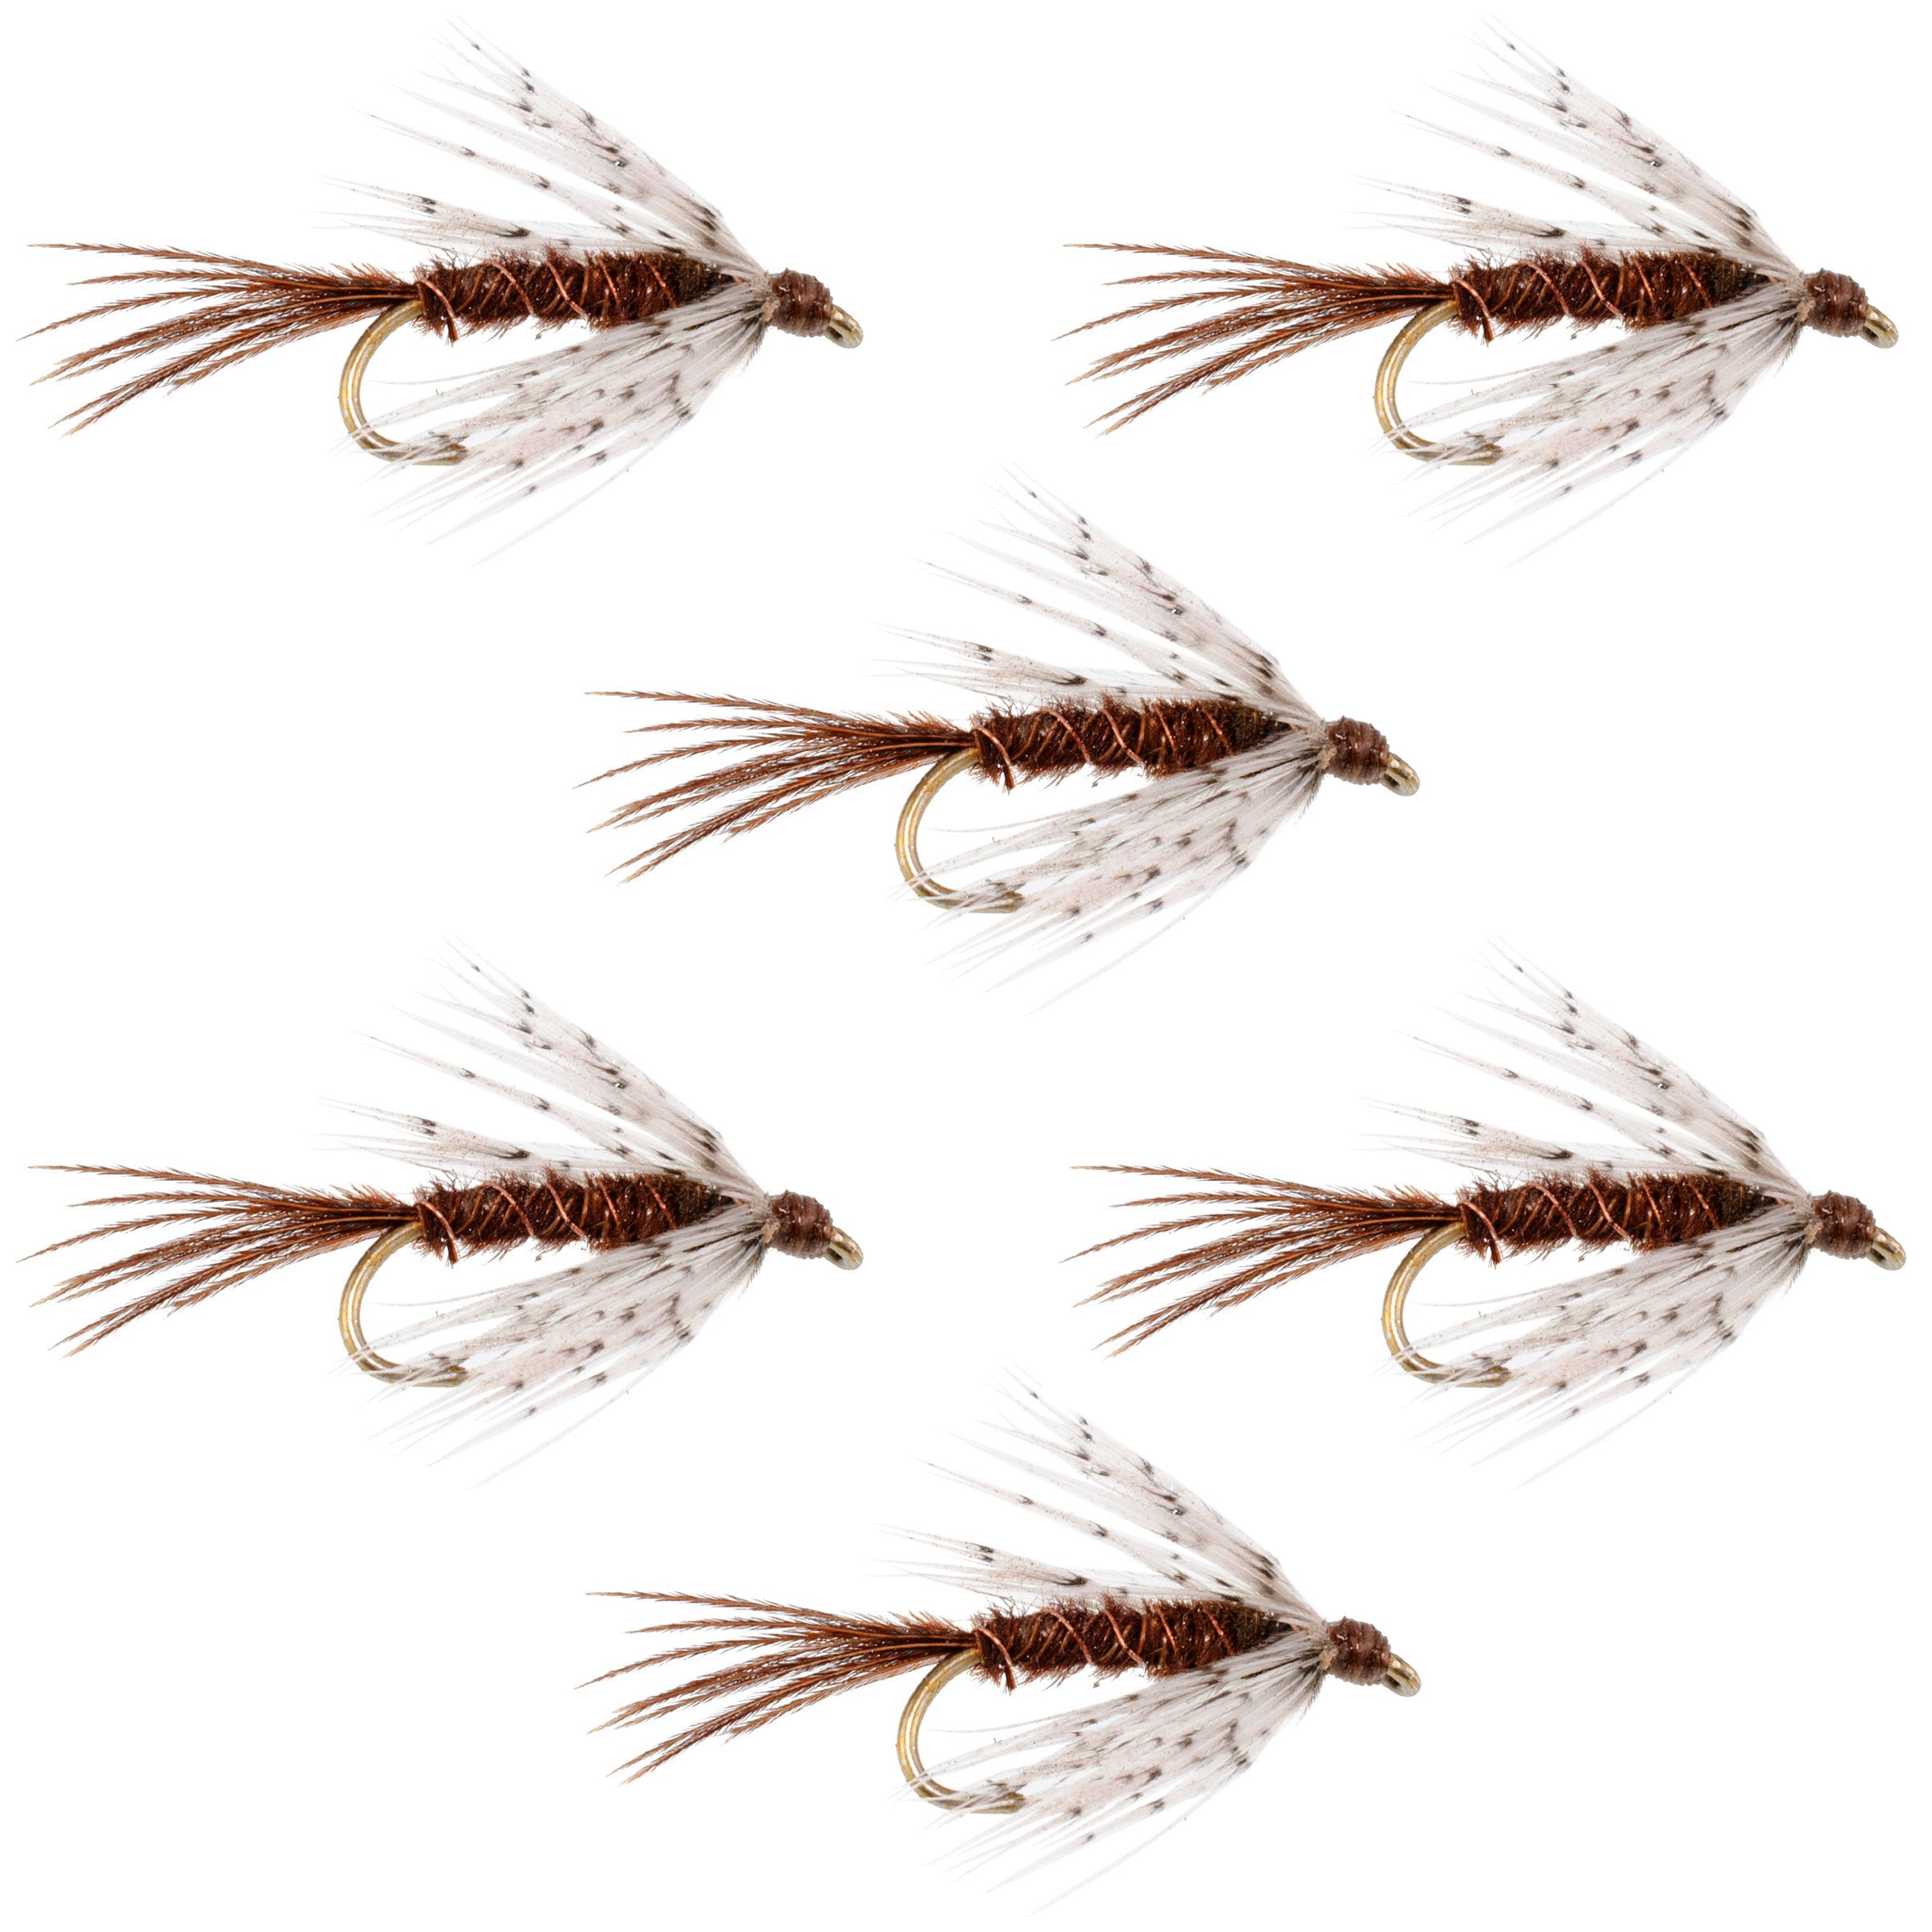 Soft Hackle Partridge and Pheasant Tail Fly Fishing Wet Flies - 6 Flies Hook Size 12